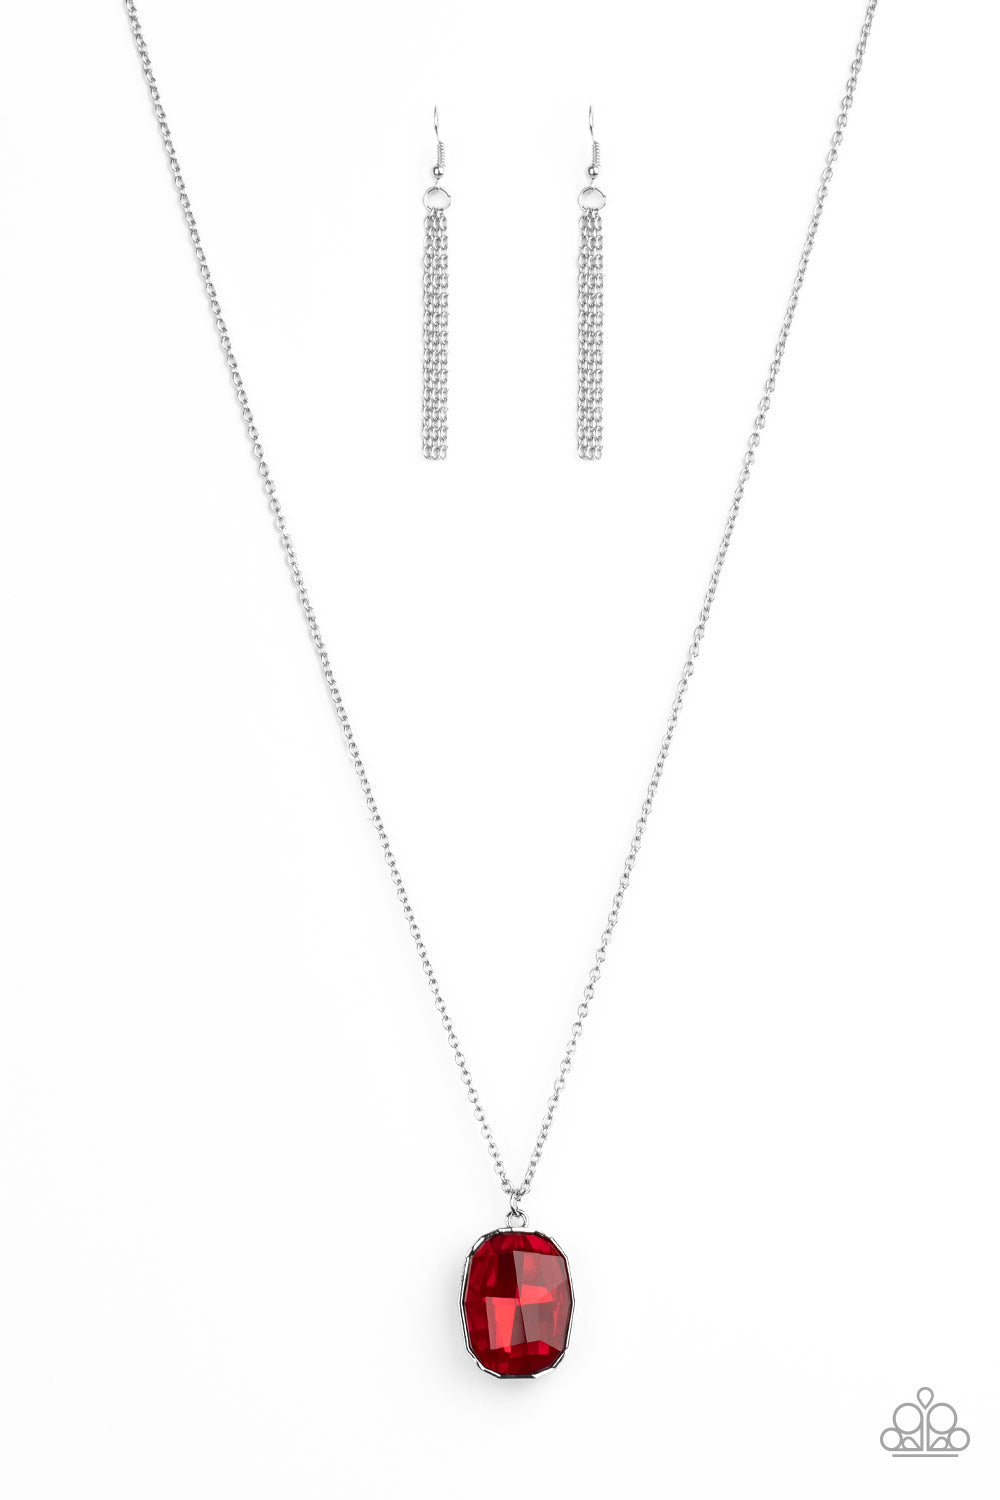 five-dollar-jewelry-imperfect-iridescence-red-paparazzi-accessories